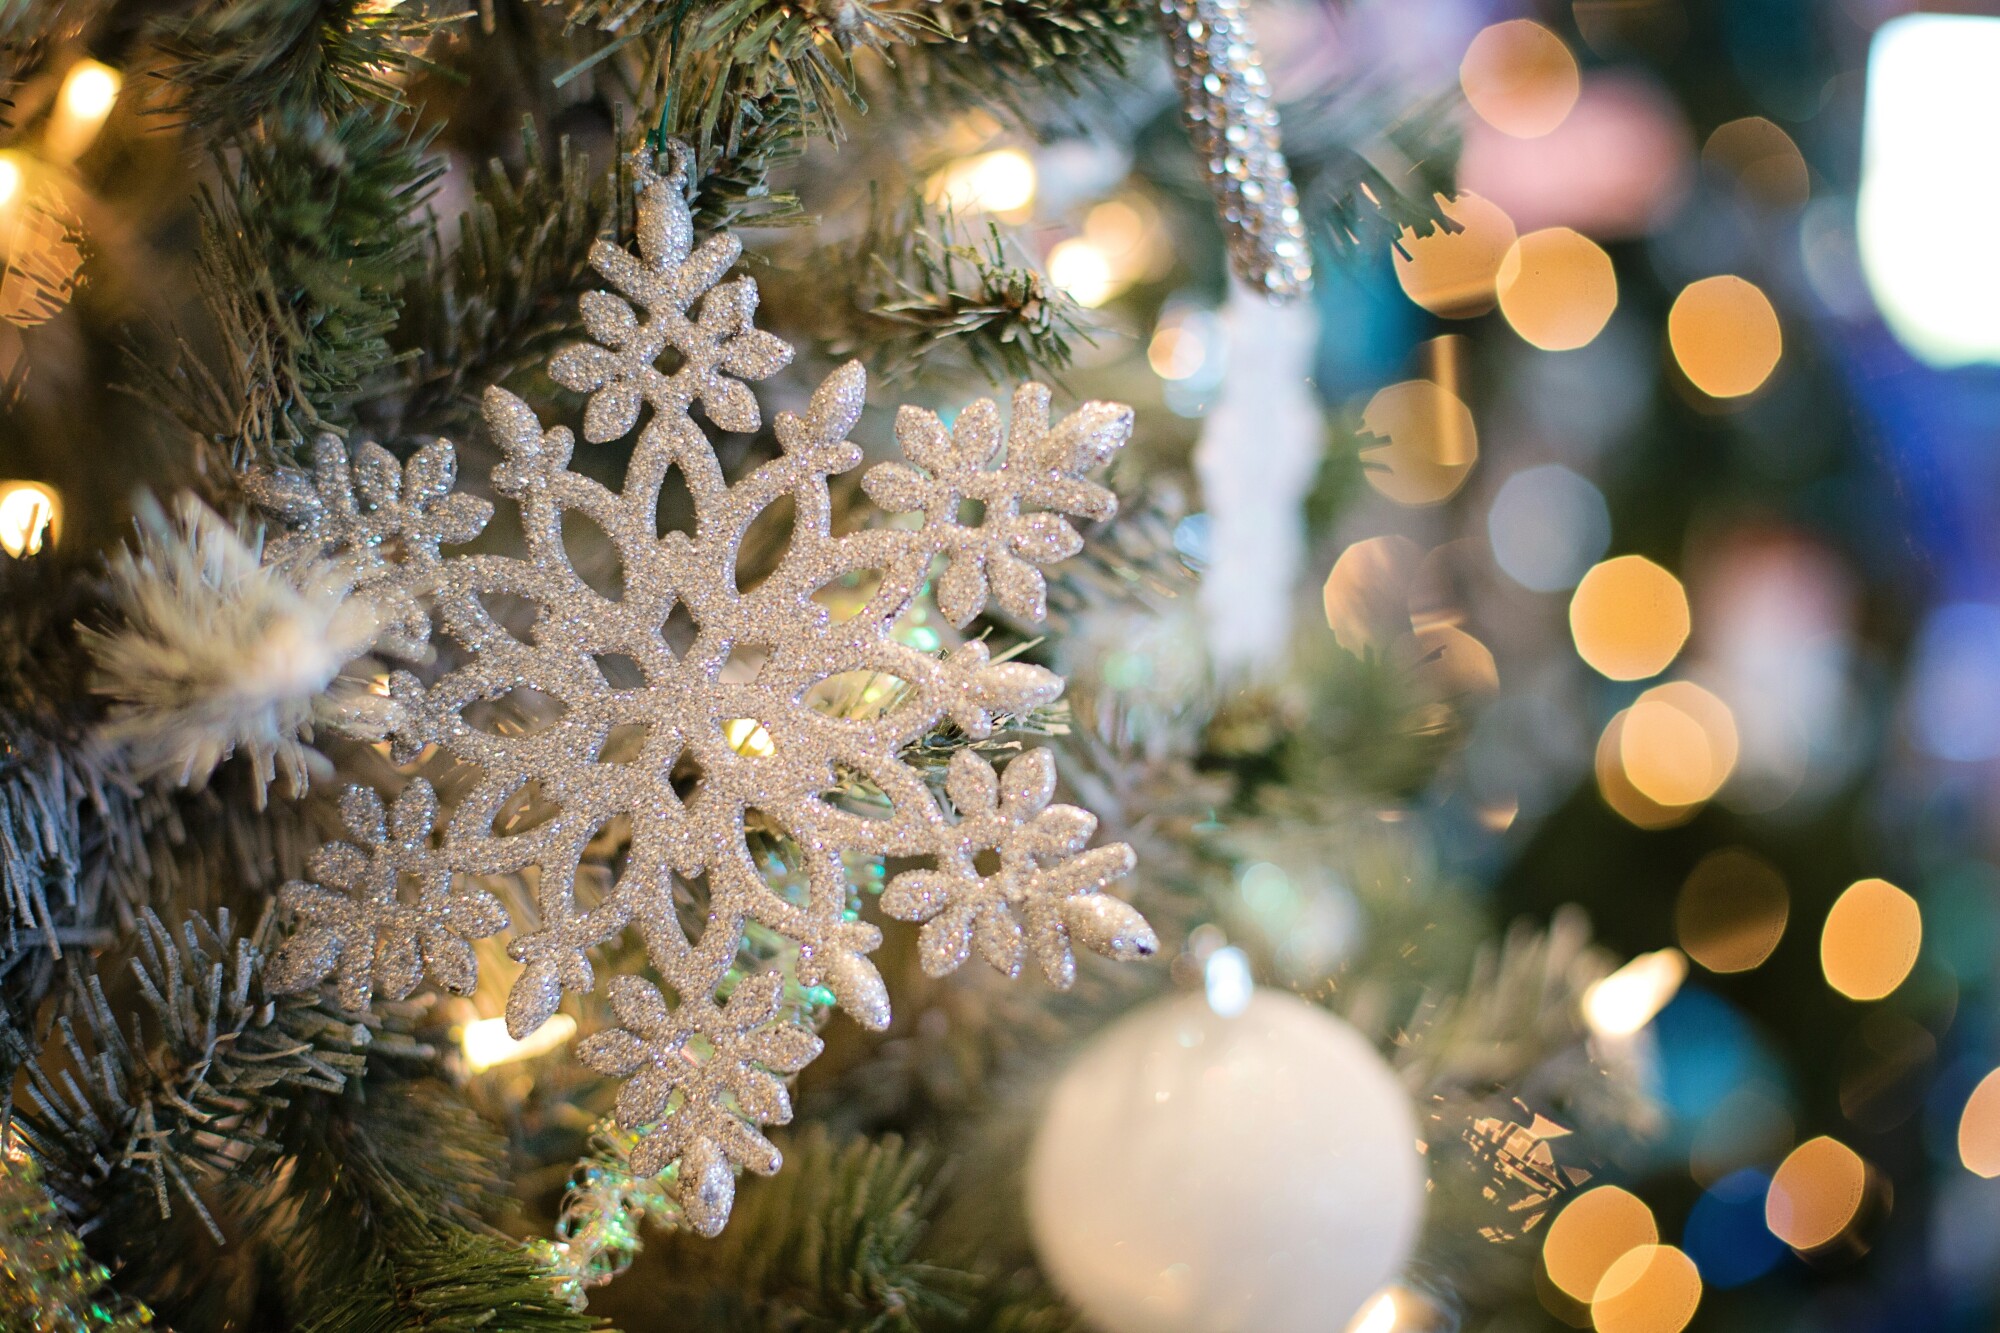 HOA Holiday Decorating Rules and Guidelines in Houston